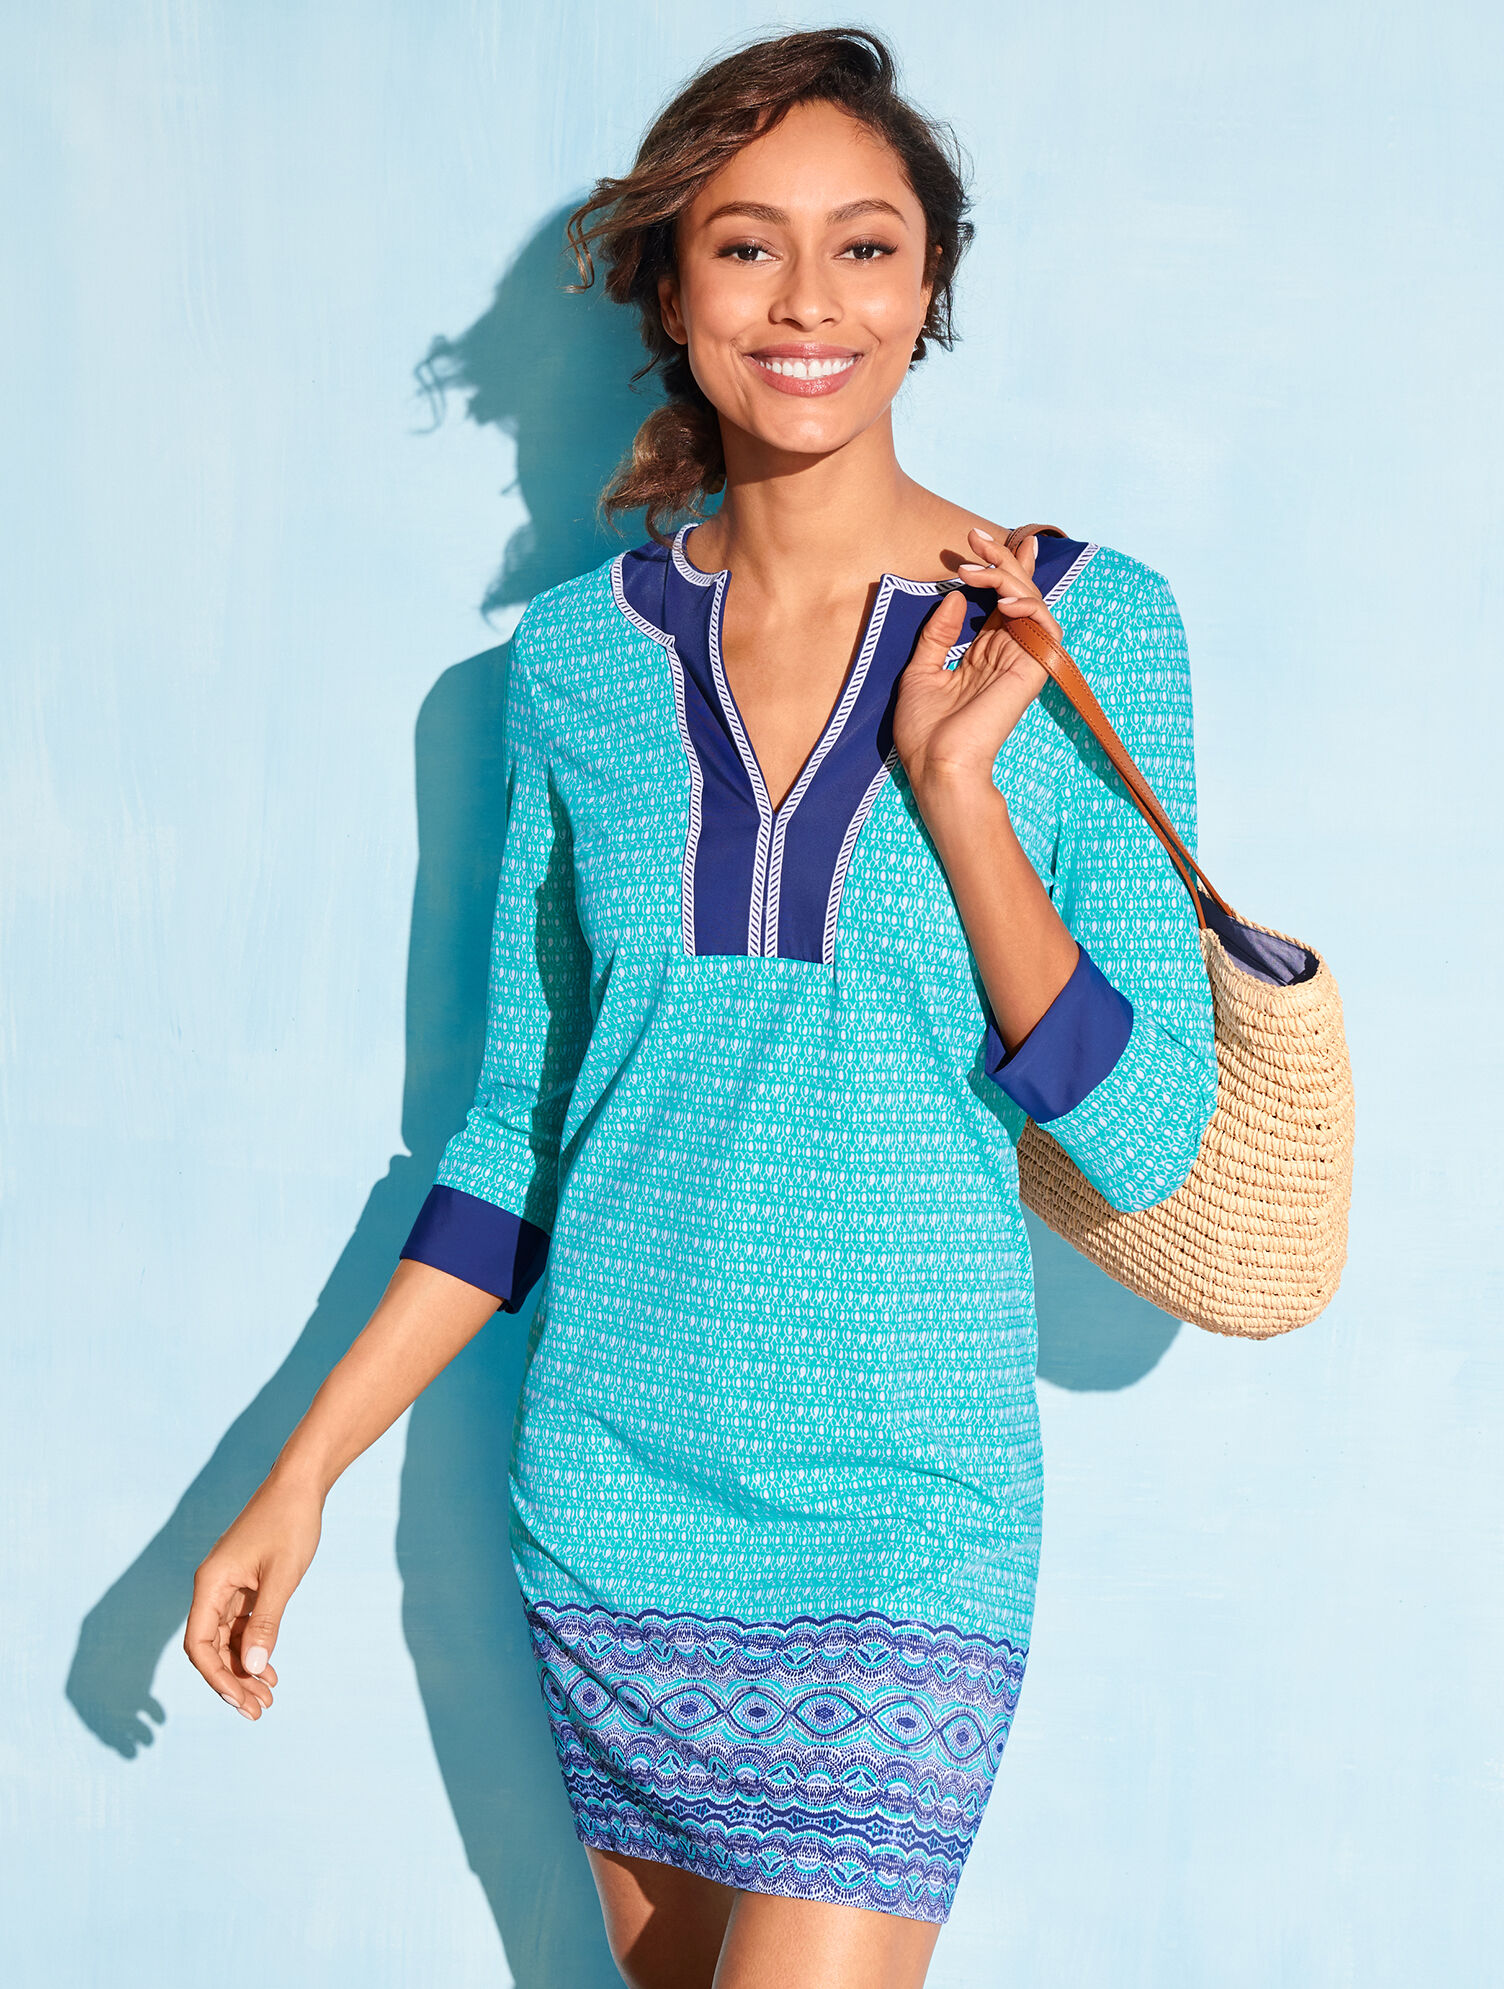 Cabana Life x Talbots (Second!) Exclusive Collaboration